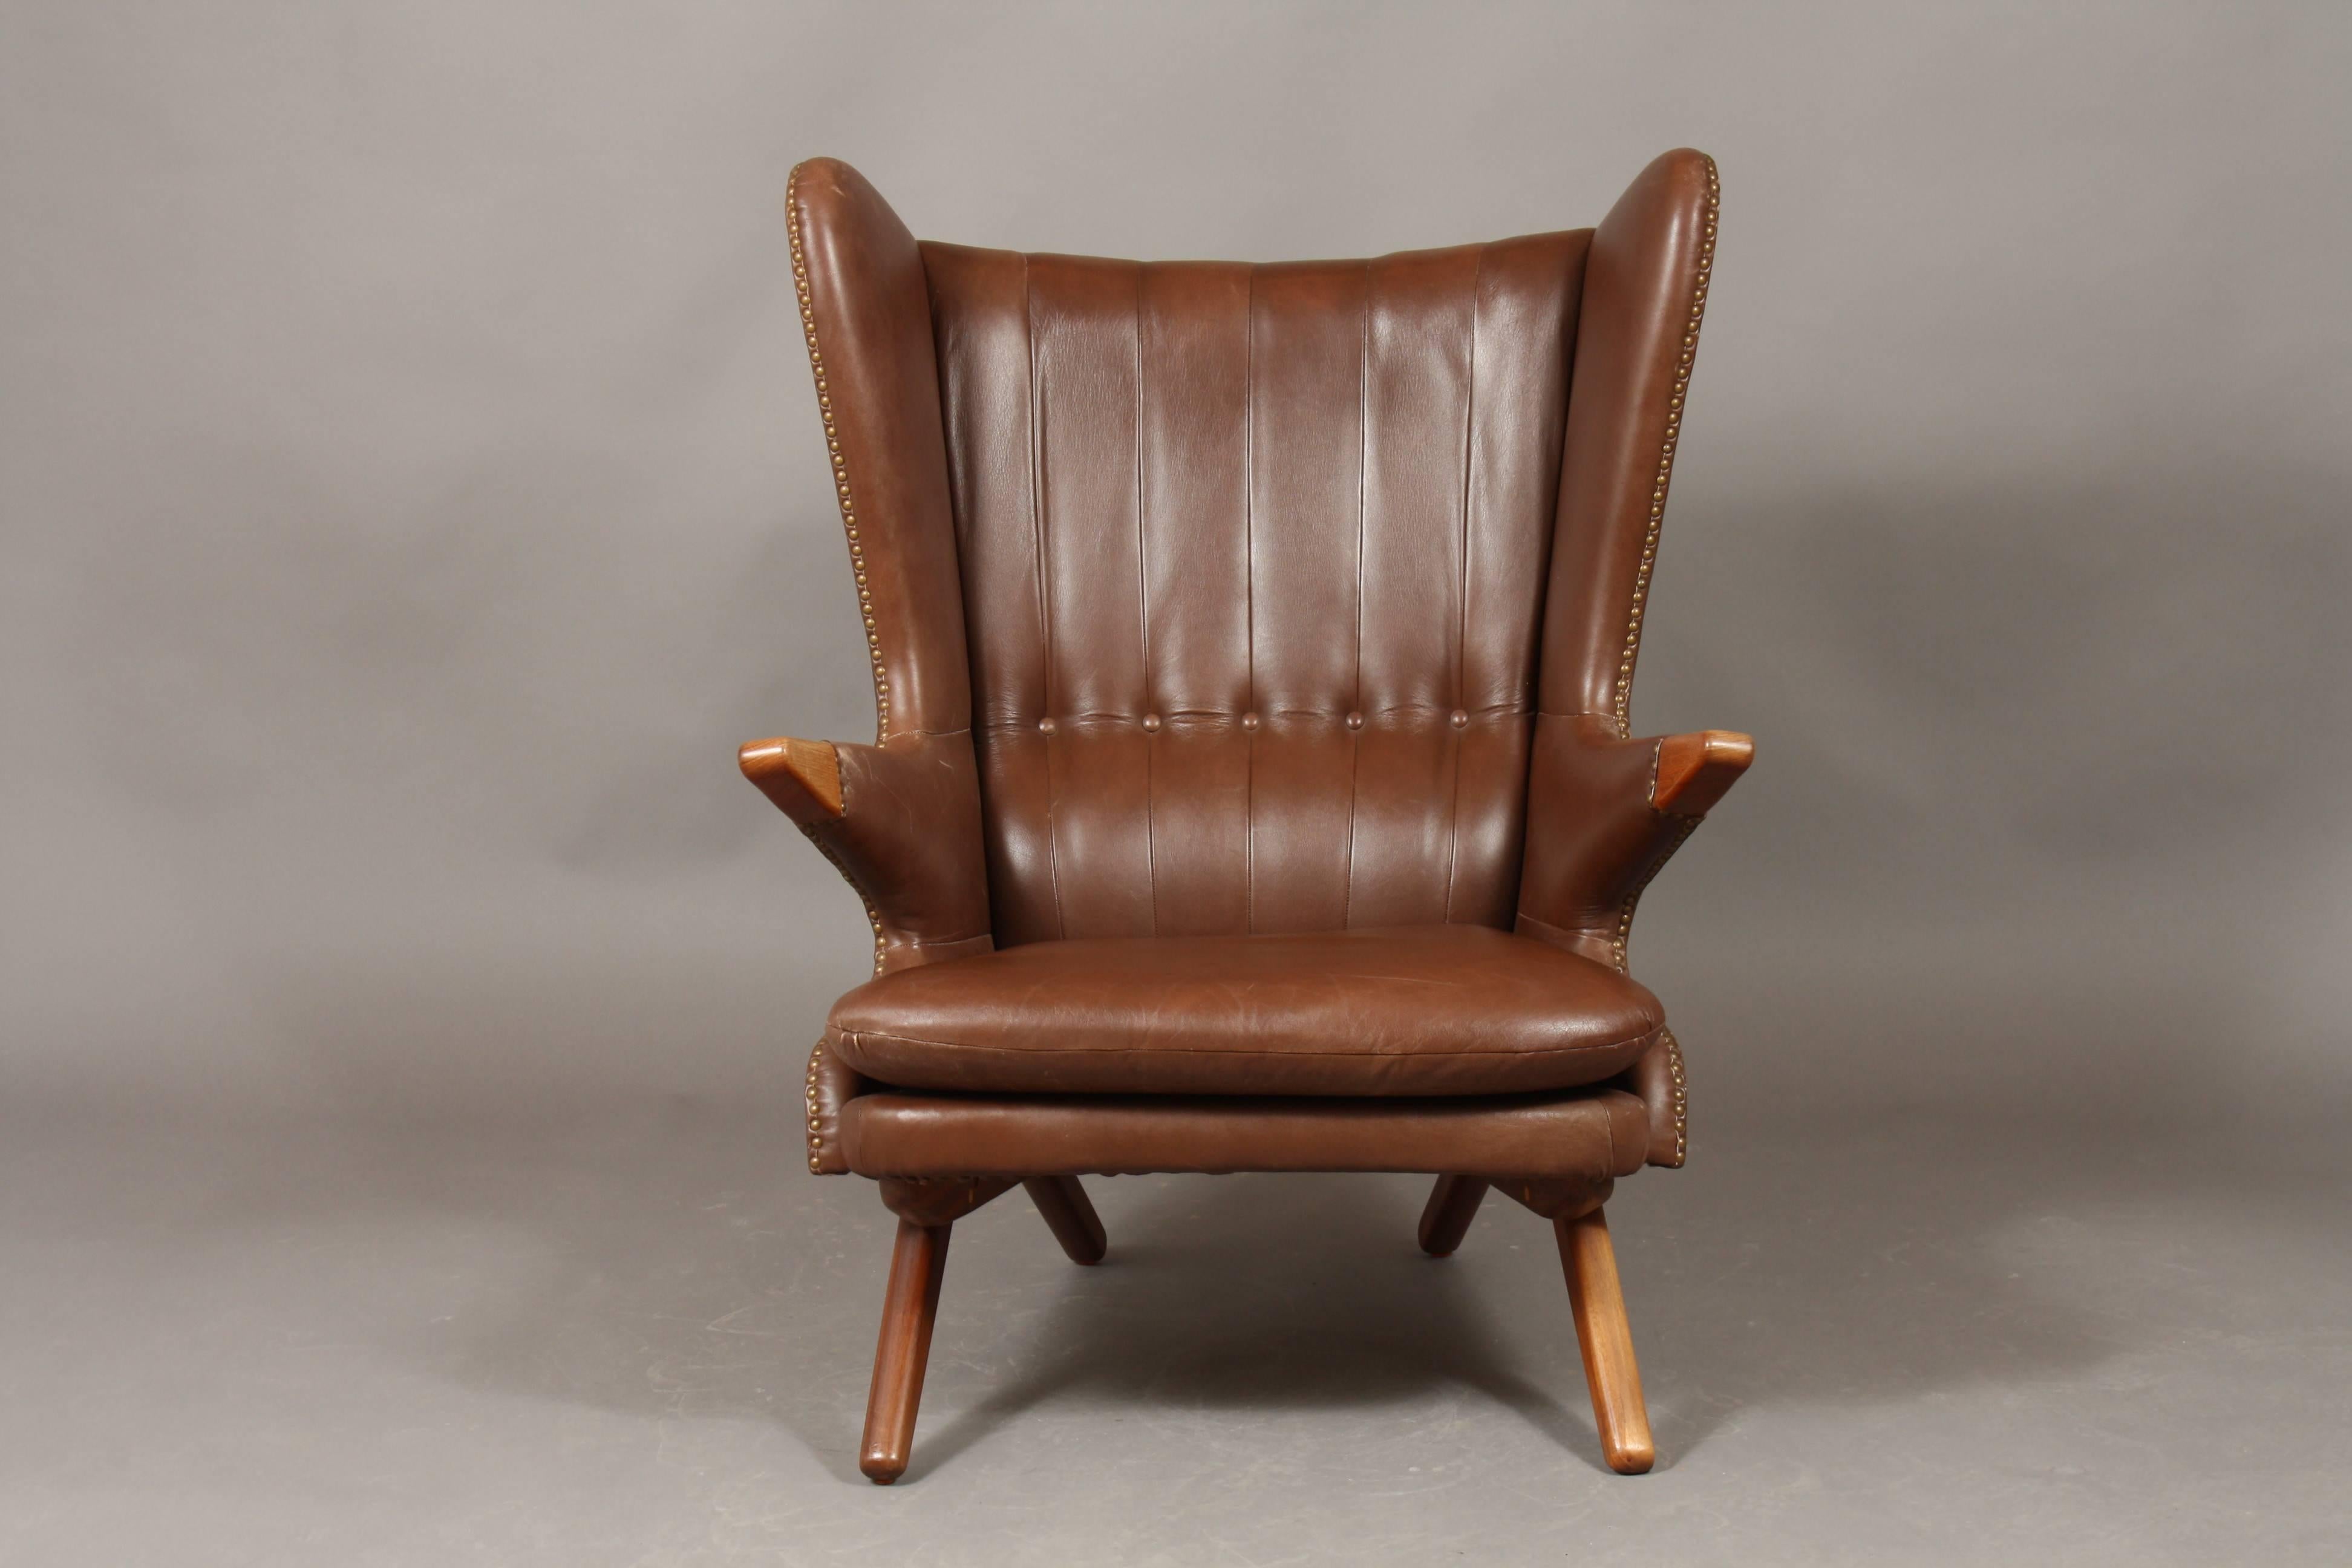 Svend skipper model 91 'Papa Bear' chair, brown leather, seam edge, studded.
The wing chair was designed by Svend Skipper for Skipper Moebelfabrik in the 1950s. The chair features a frame in teak. The high chair back not only provides a striking